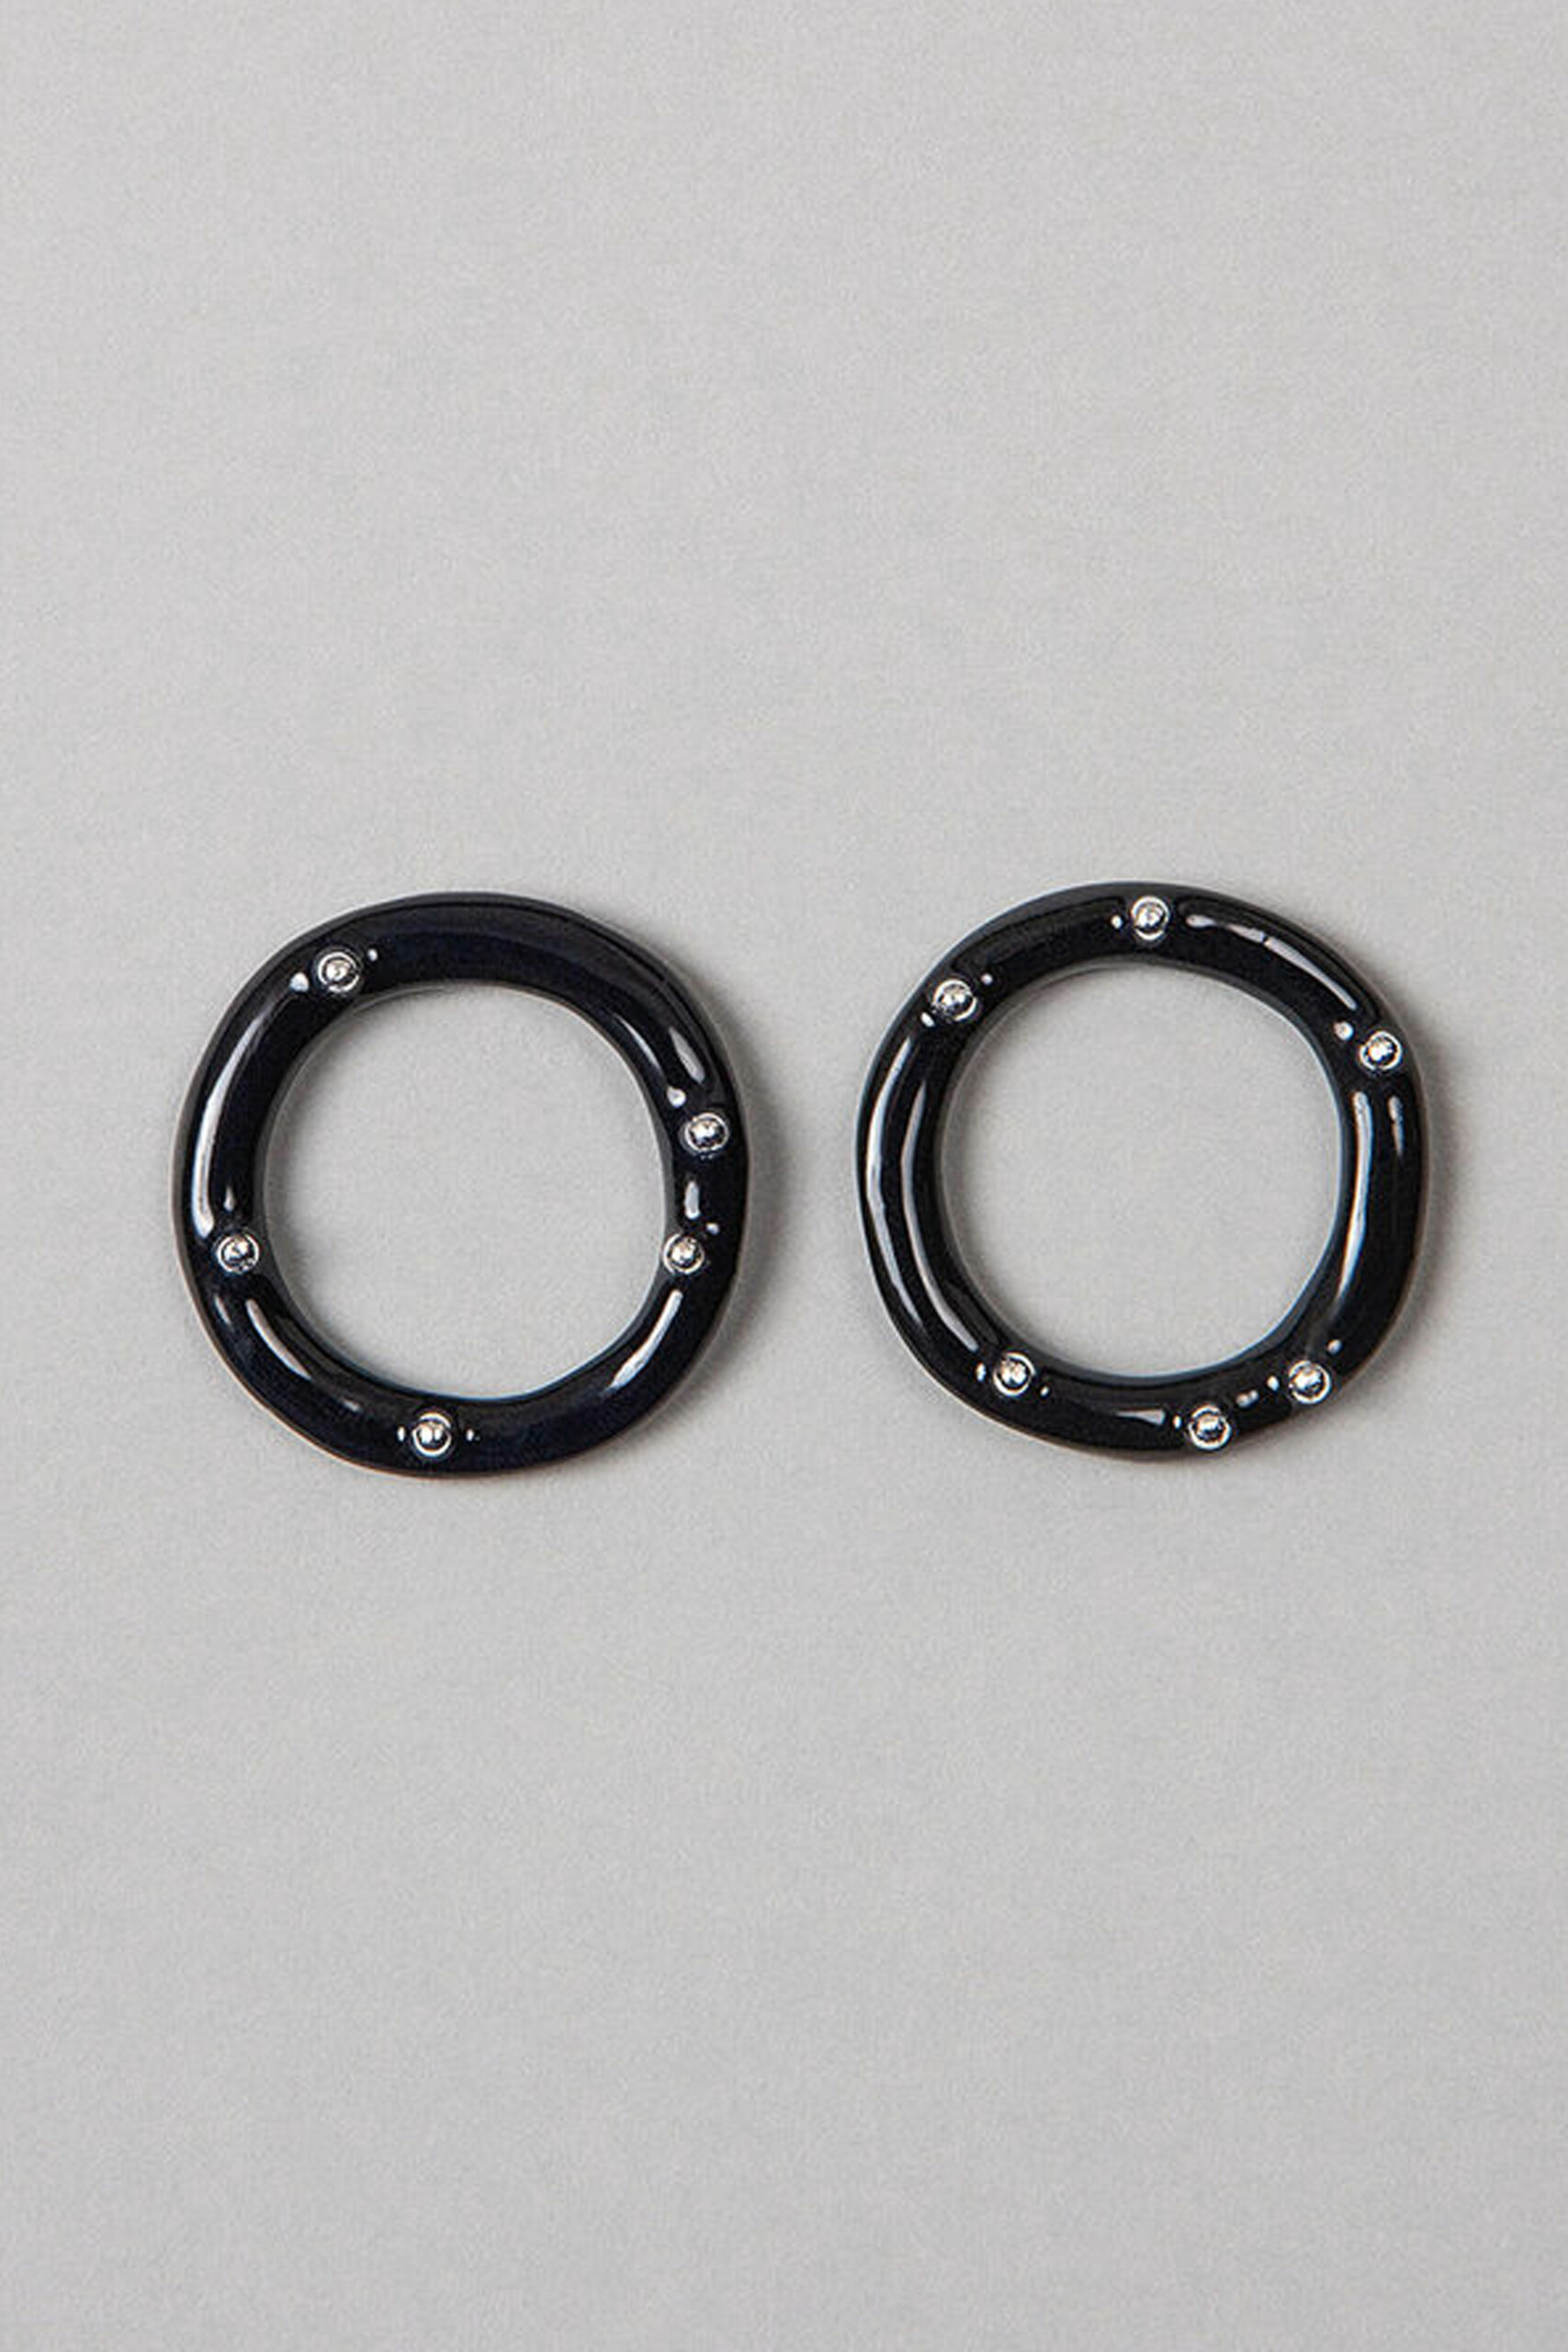 ABE Earrings black circle with silver accents